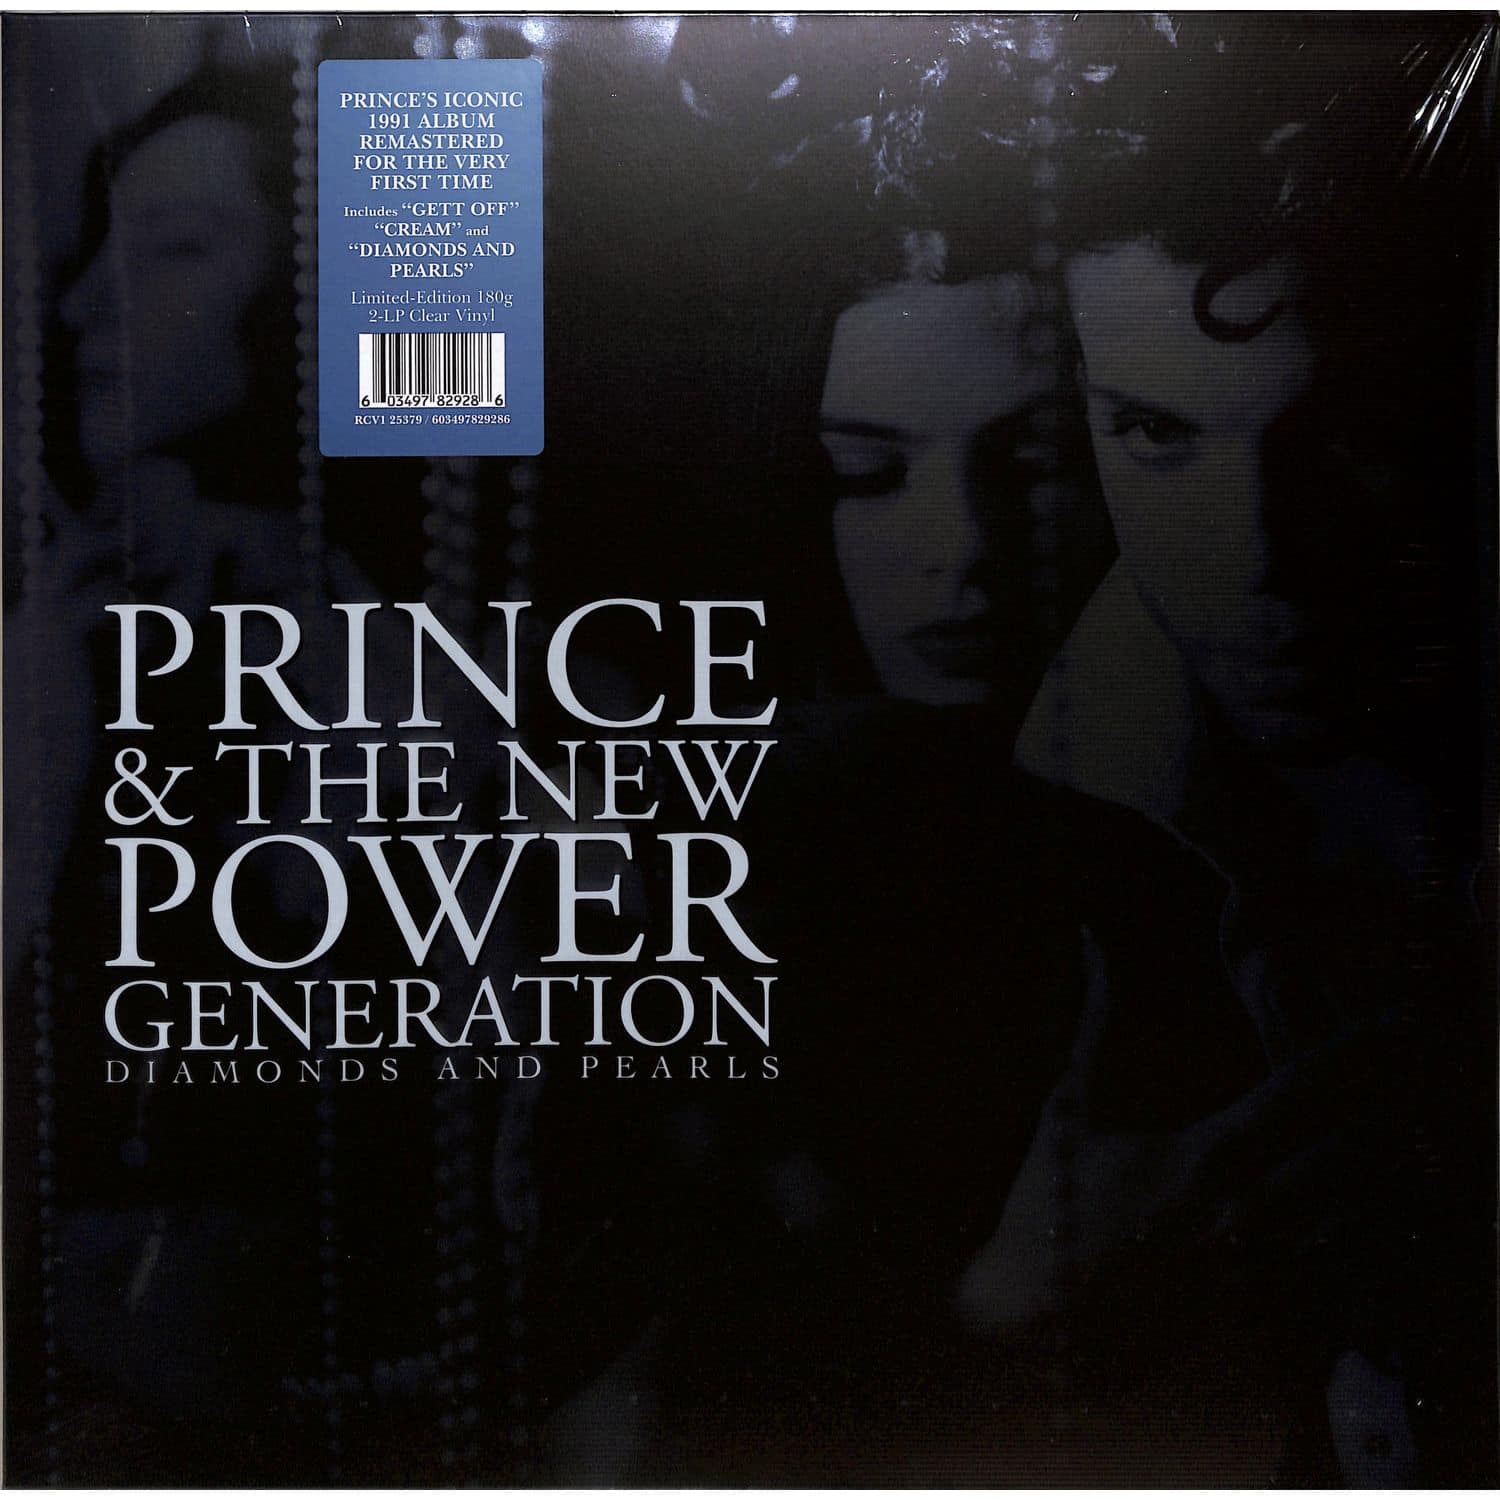 Prince & The New Power Generation - DIAMONDS AND PEARLS 